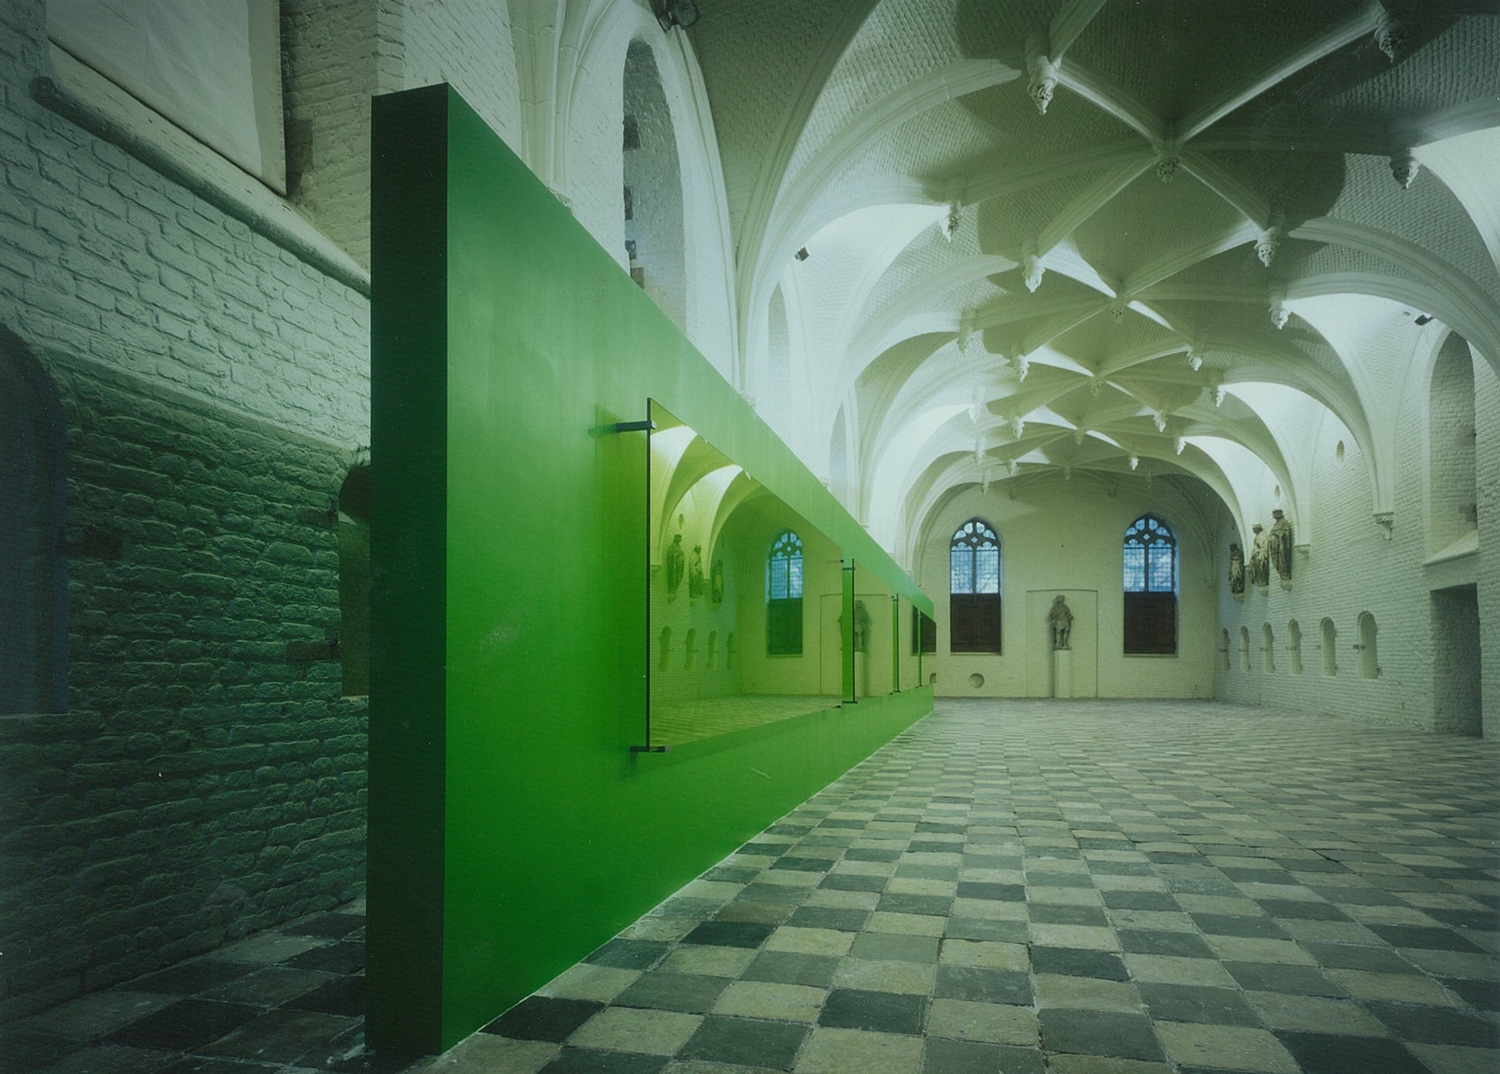 Pieter Slagboom,'Untitled', 1992. Exhibition overview. Photo: Wim Riemens | Untitled | Pieter Slagboom